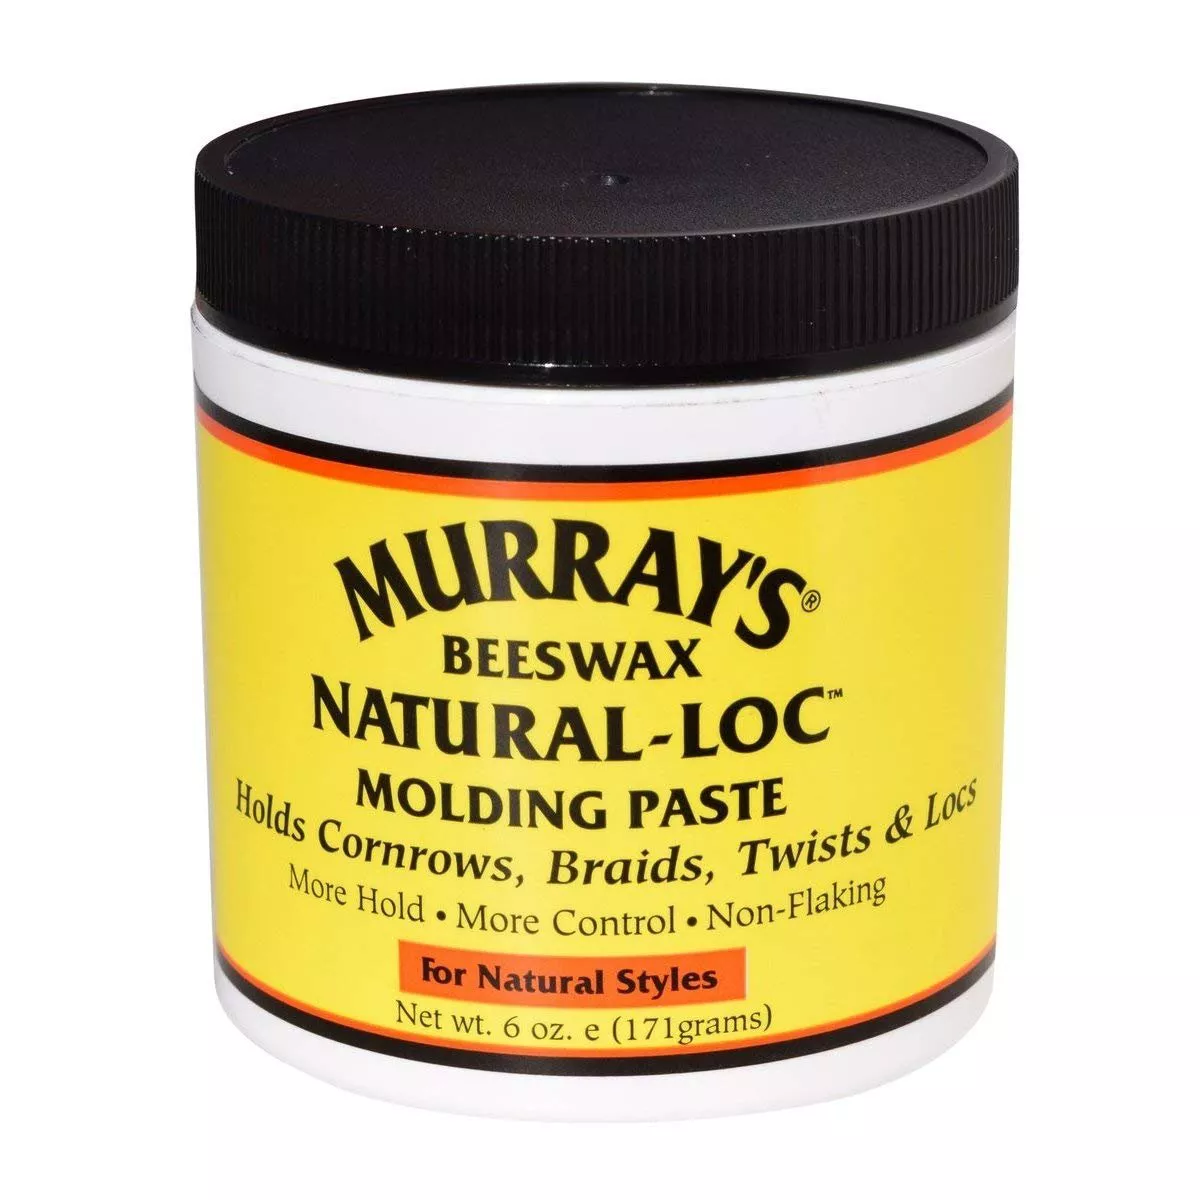 Murray's Natural-Loc Molding Paste